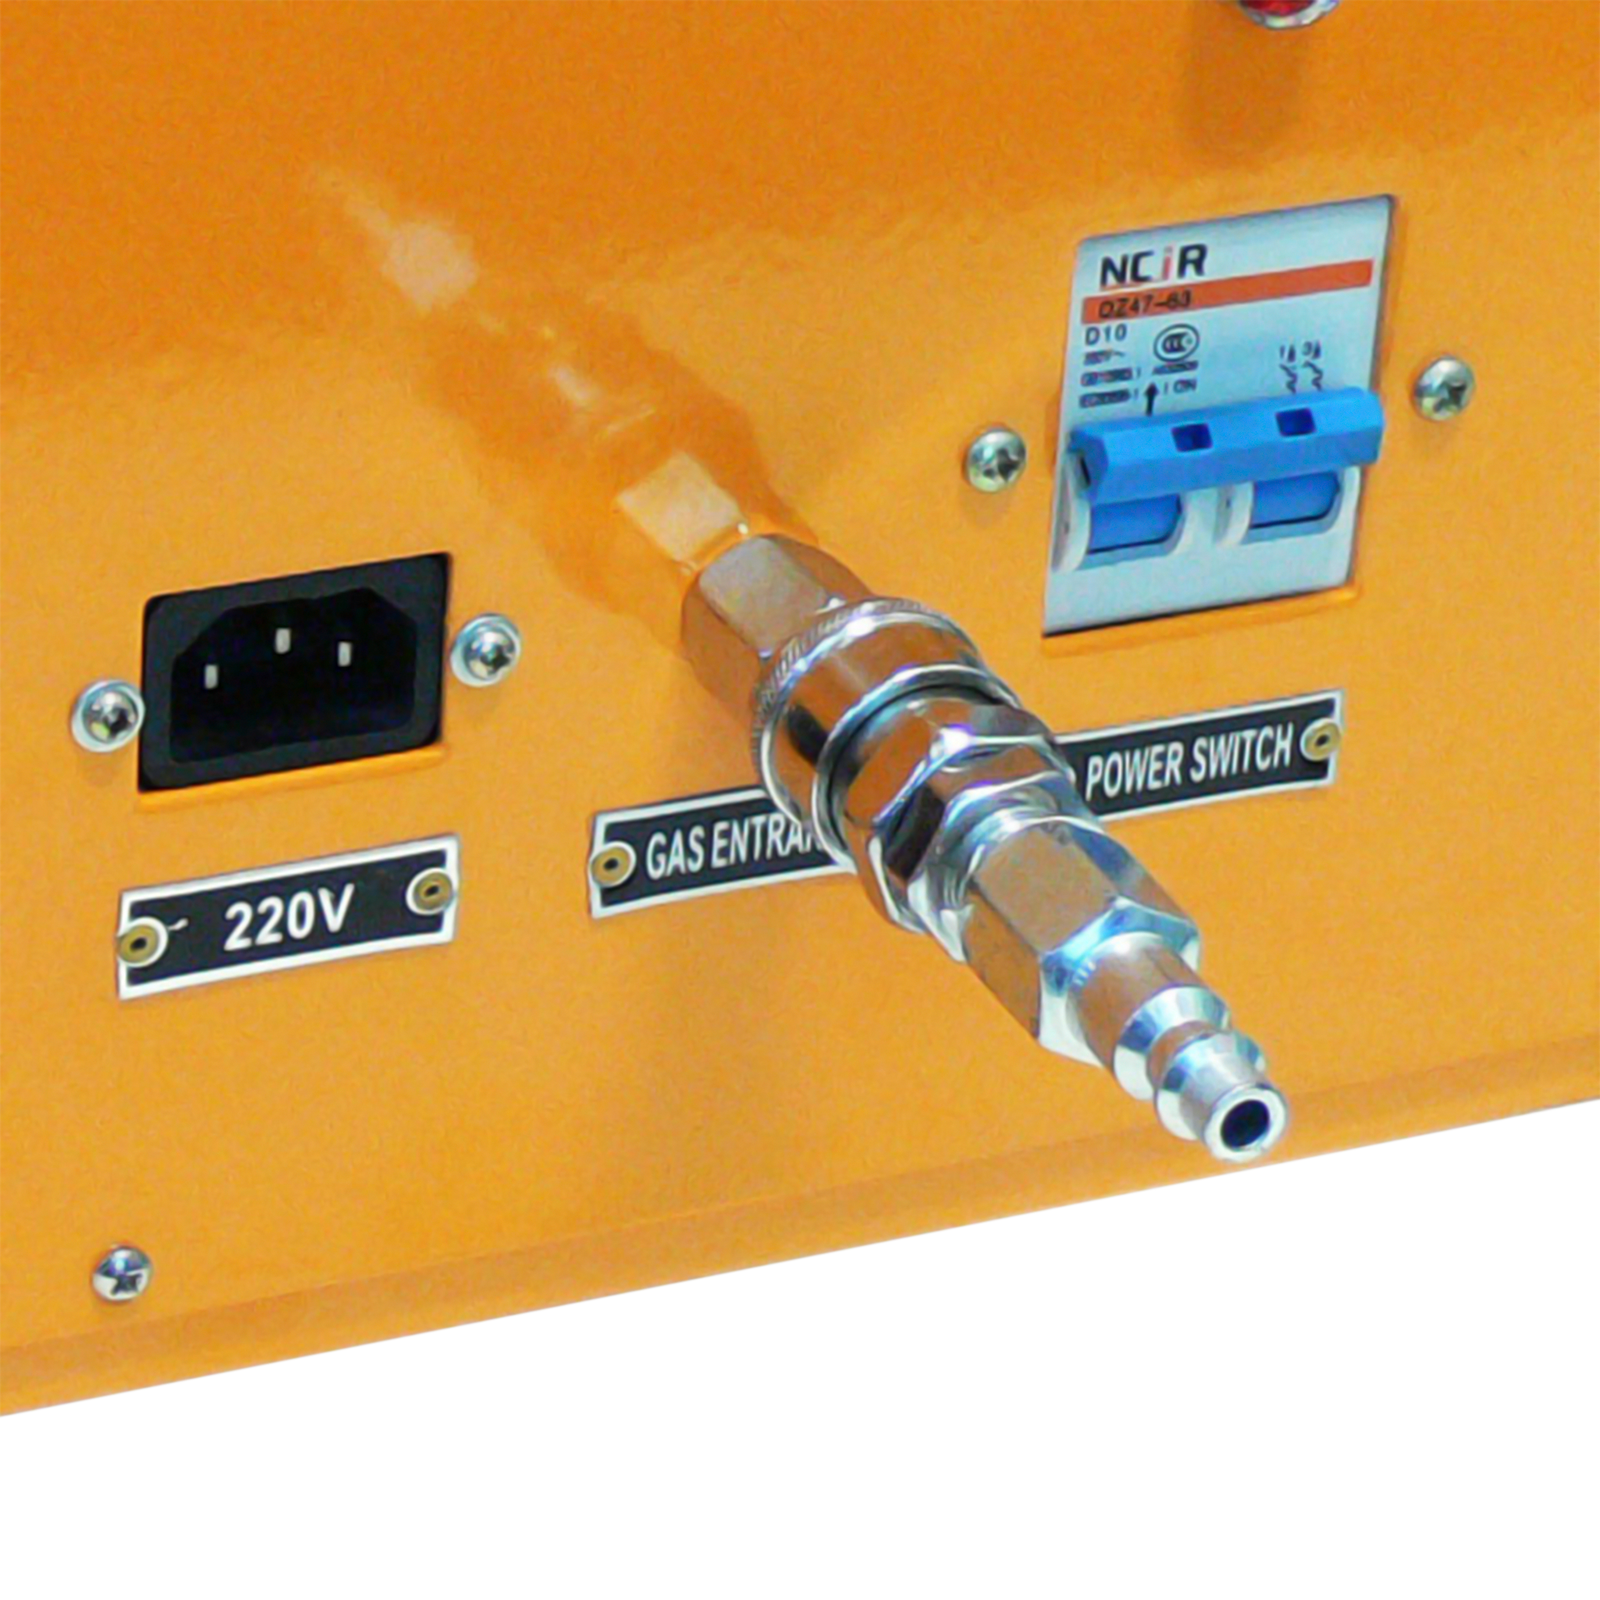 Close-up of following details on an impulse heat bag sealer: 220v Power Socket, Gas entrance connector, and power switch.